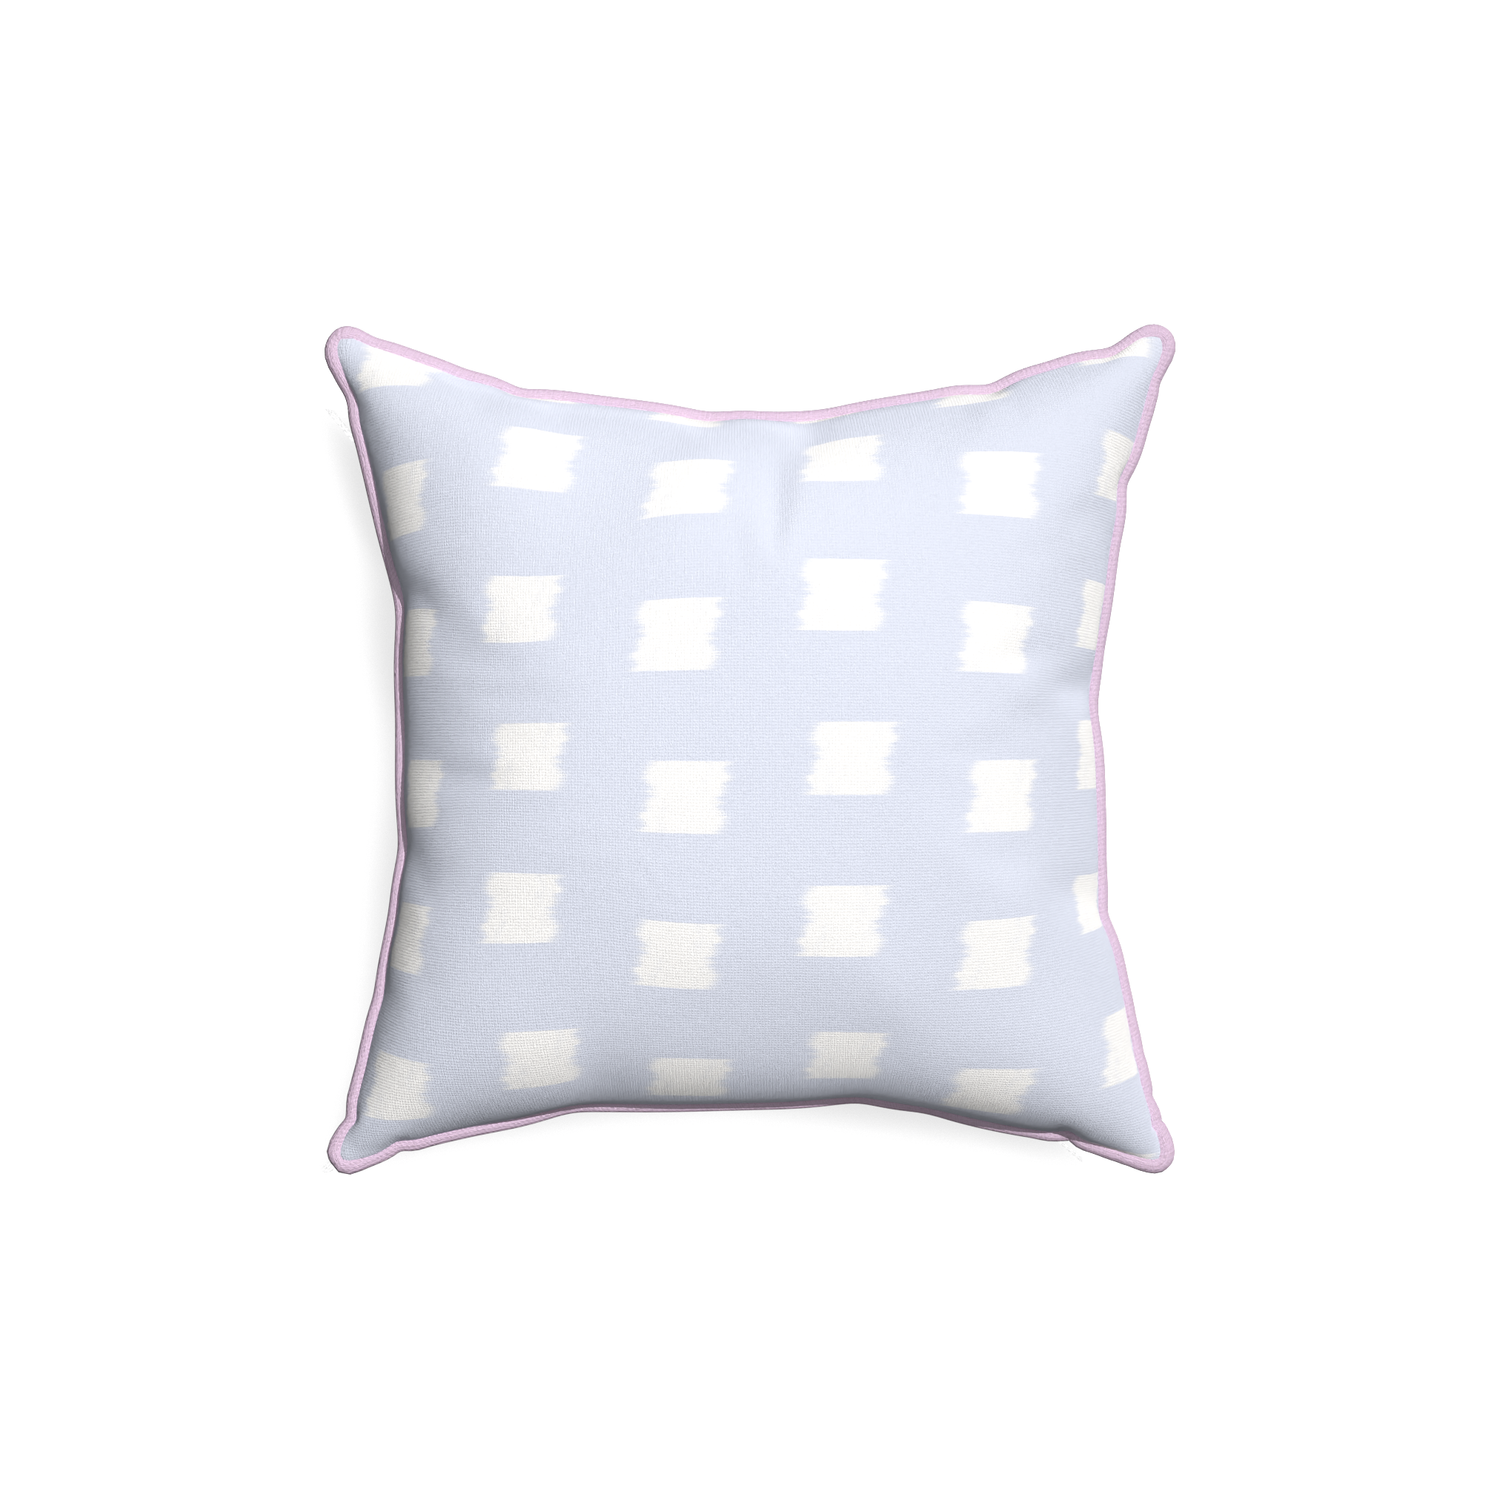 18-square denton custom pillow with l piping on white background